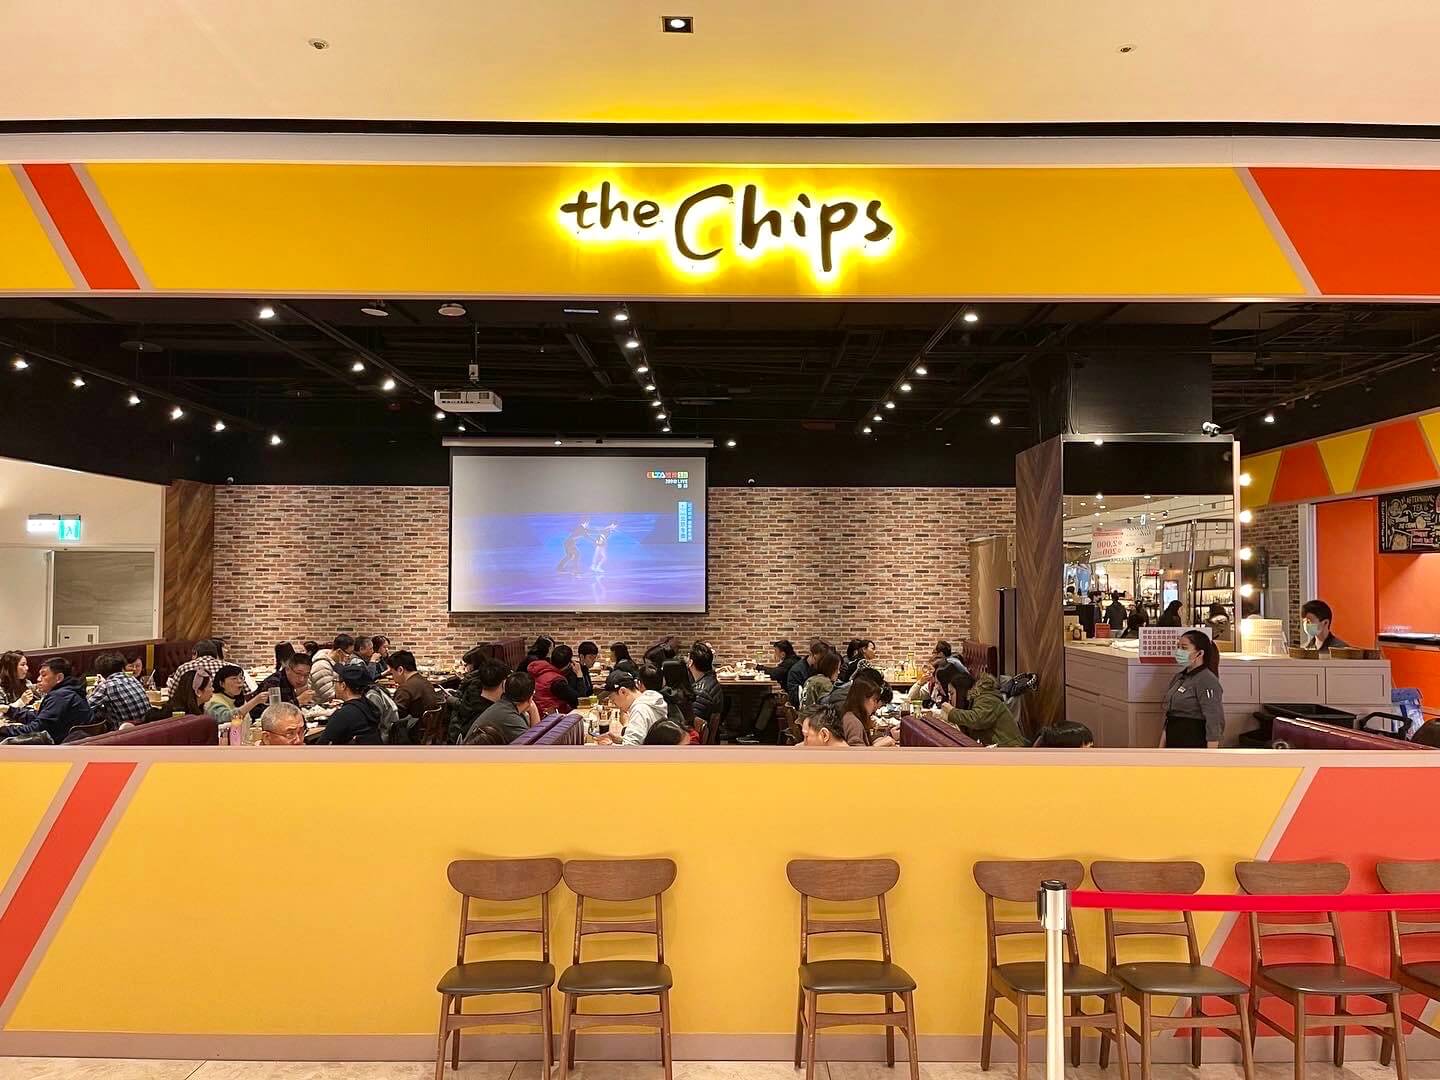 The chips